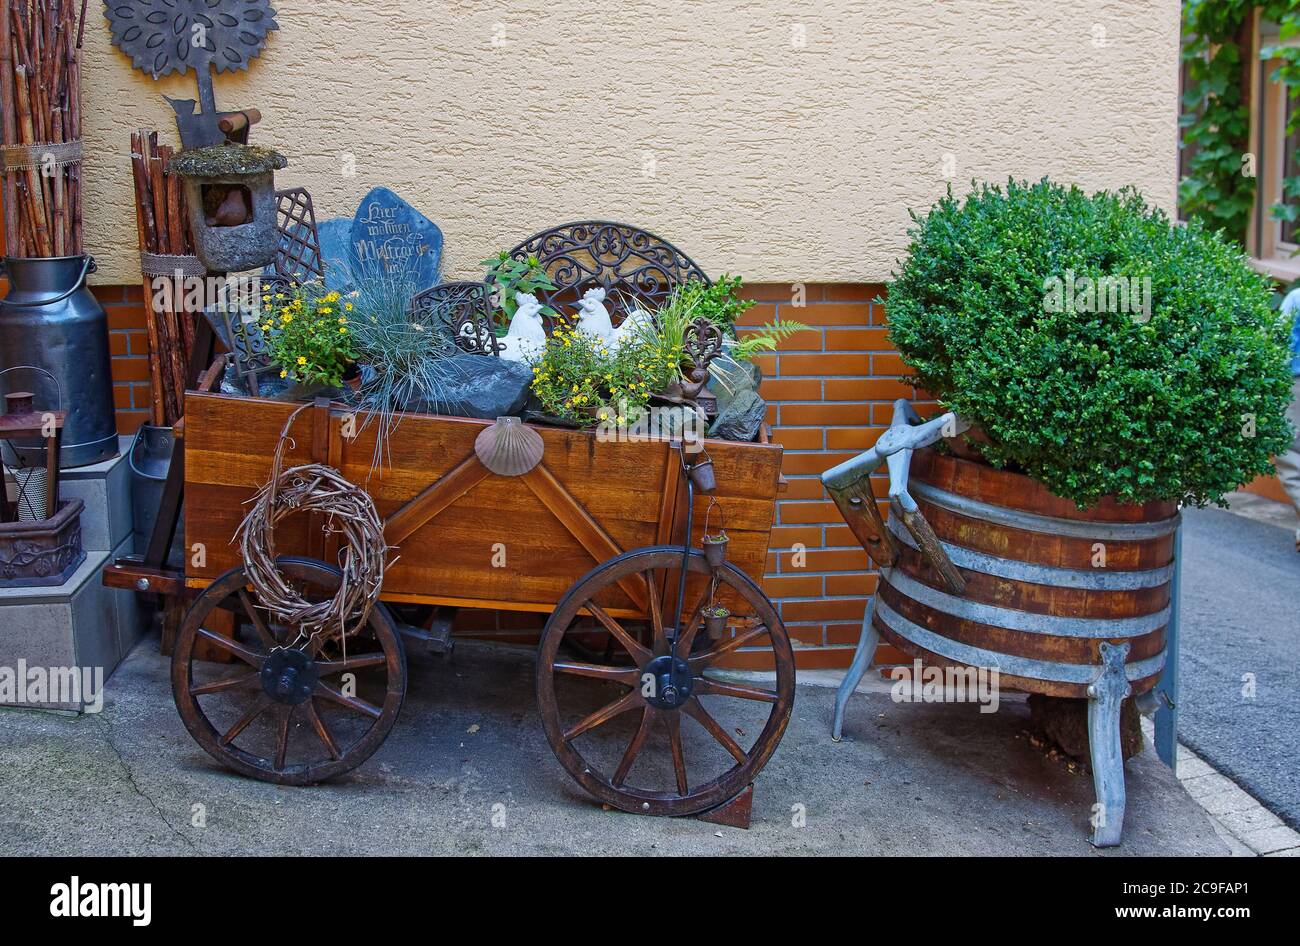 antiques, outside decorations, varied items, cart, wine barrel, flowers, sloped street, Europe, Zell; Germany Stock Photo